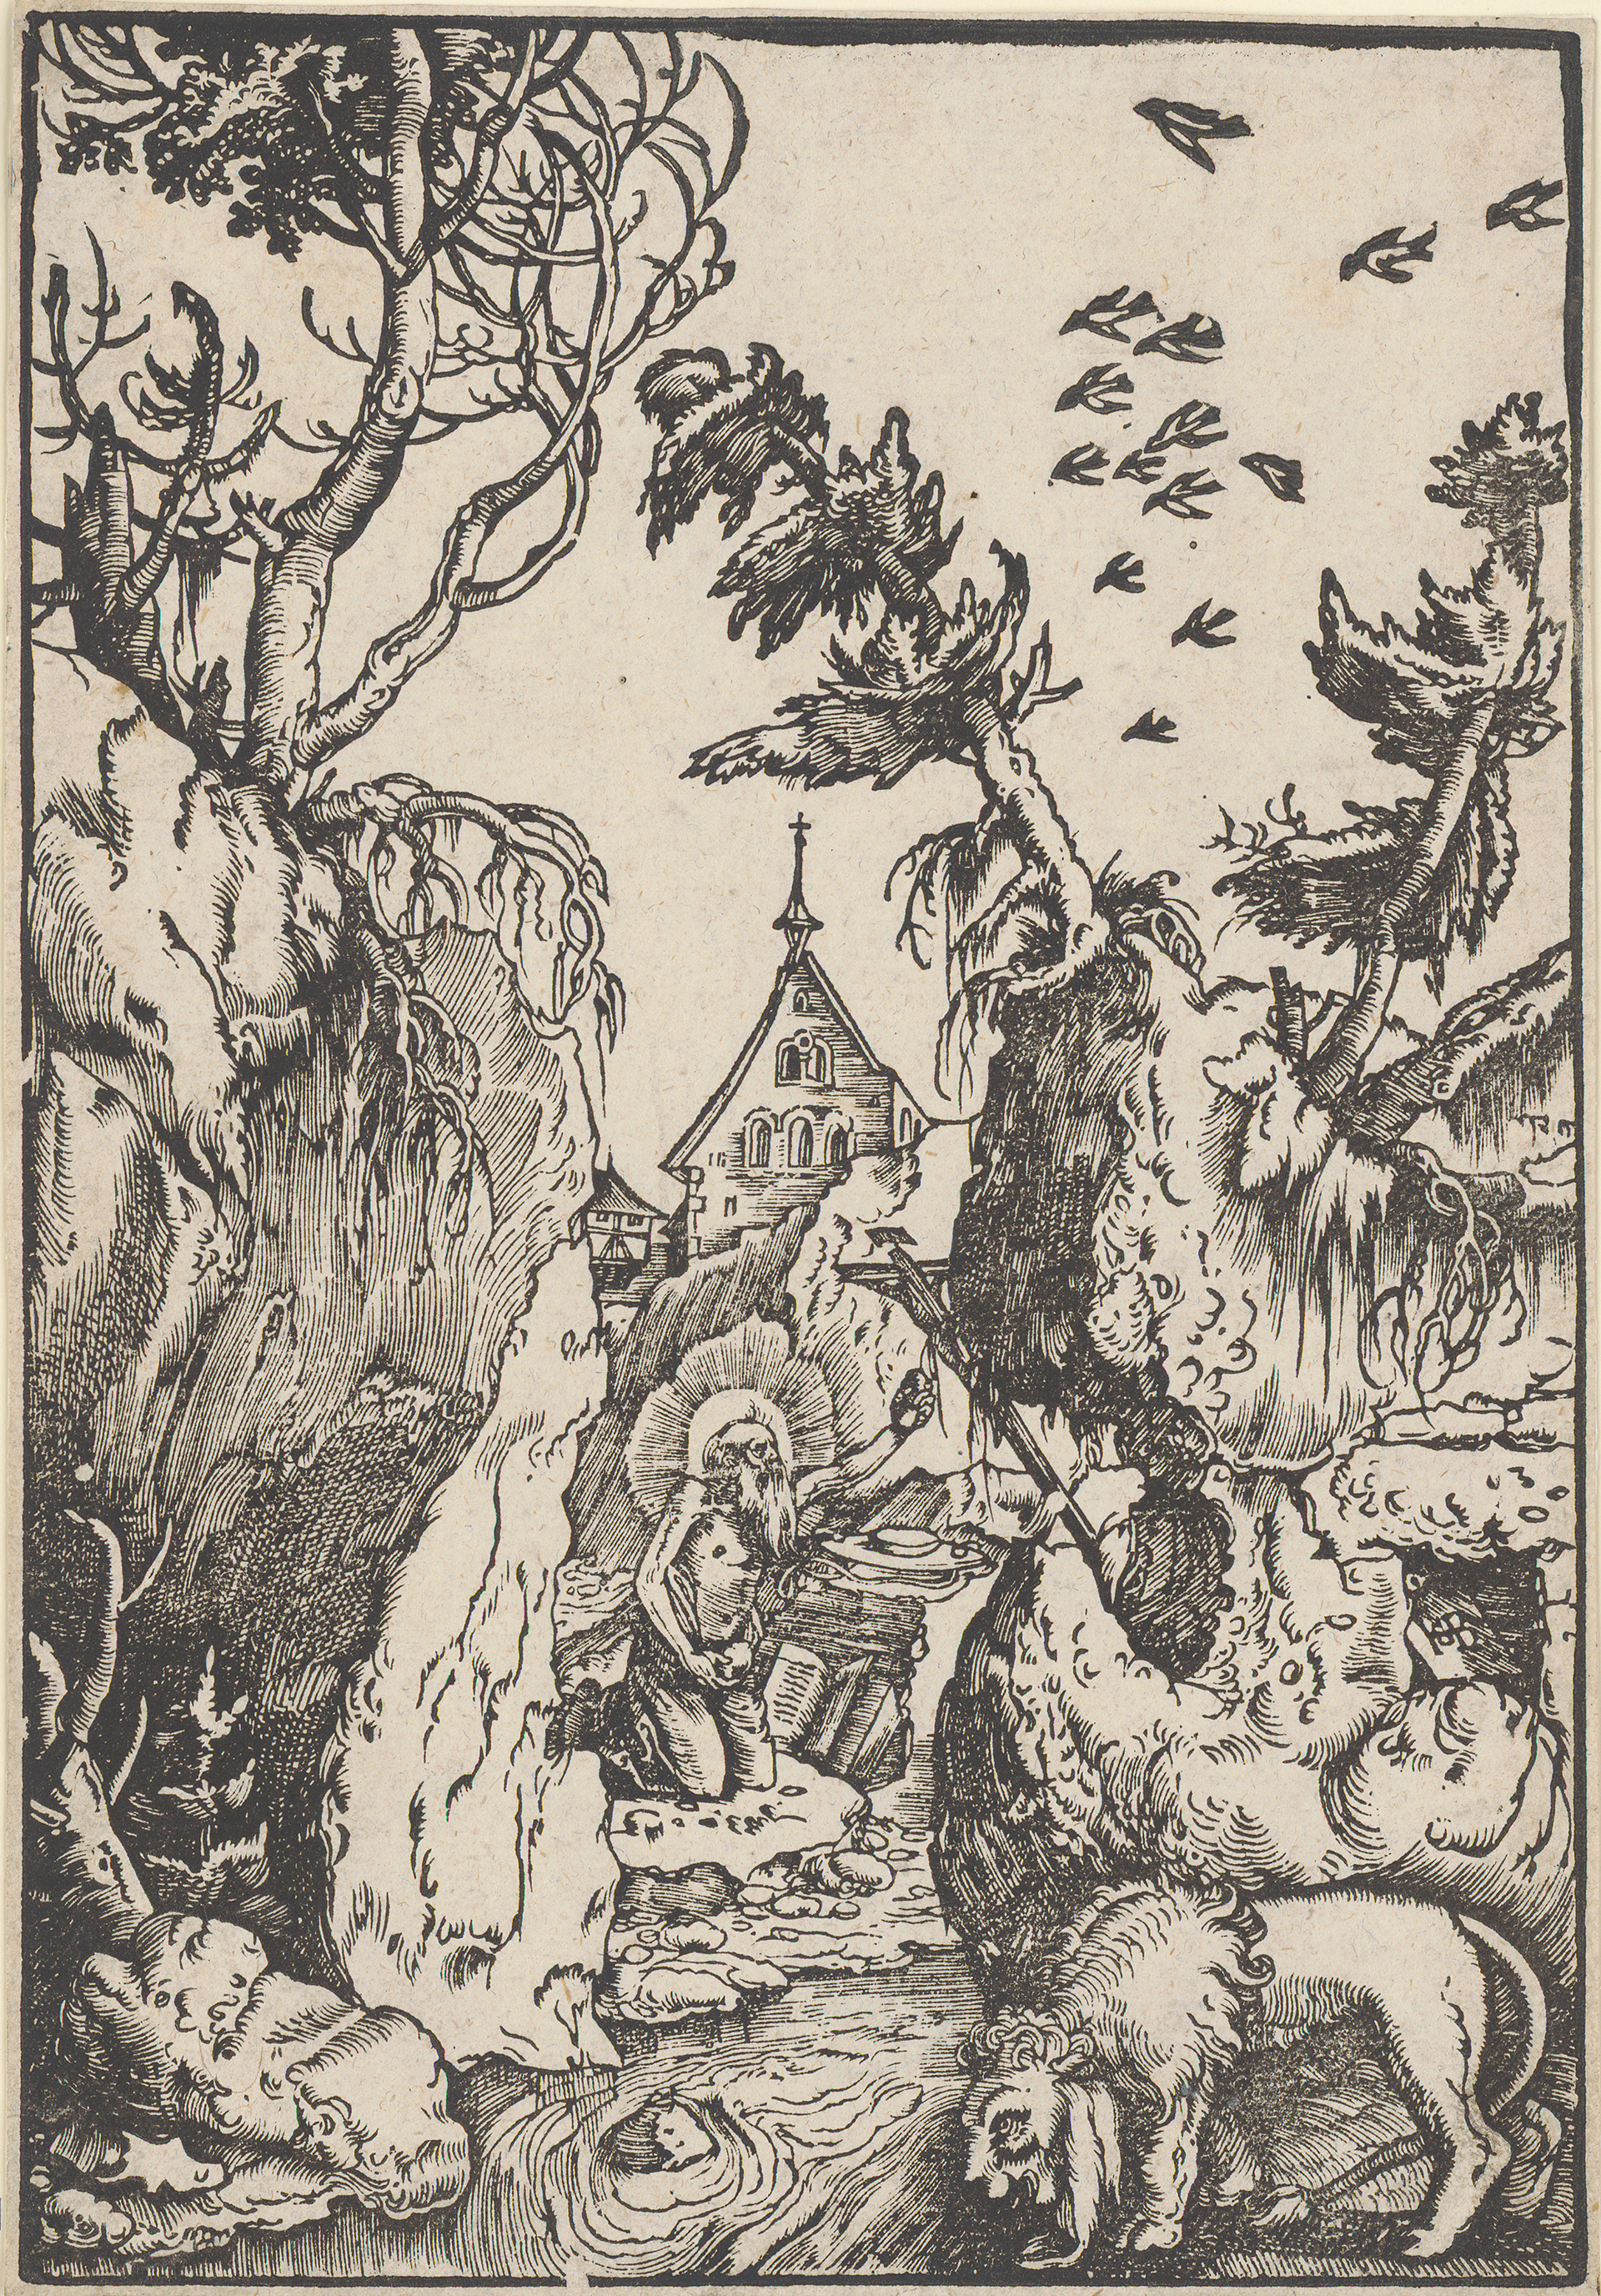 Image of Hans Baldung Grien: Saint Jerome Penitent, around 1511, borrowed from Hamburger Kunsthalle. The artwork shows a man kneeling in front of a rock. A mountainous landscape can be seen in the background.